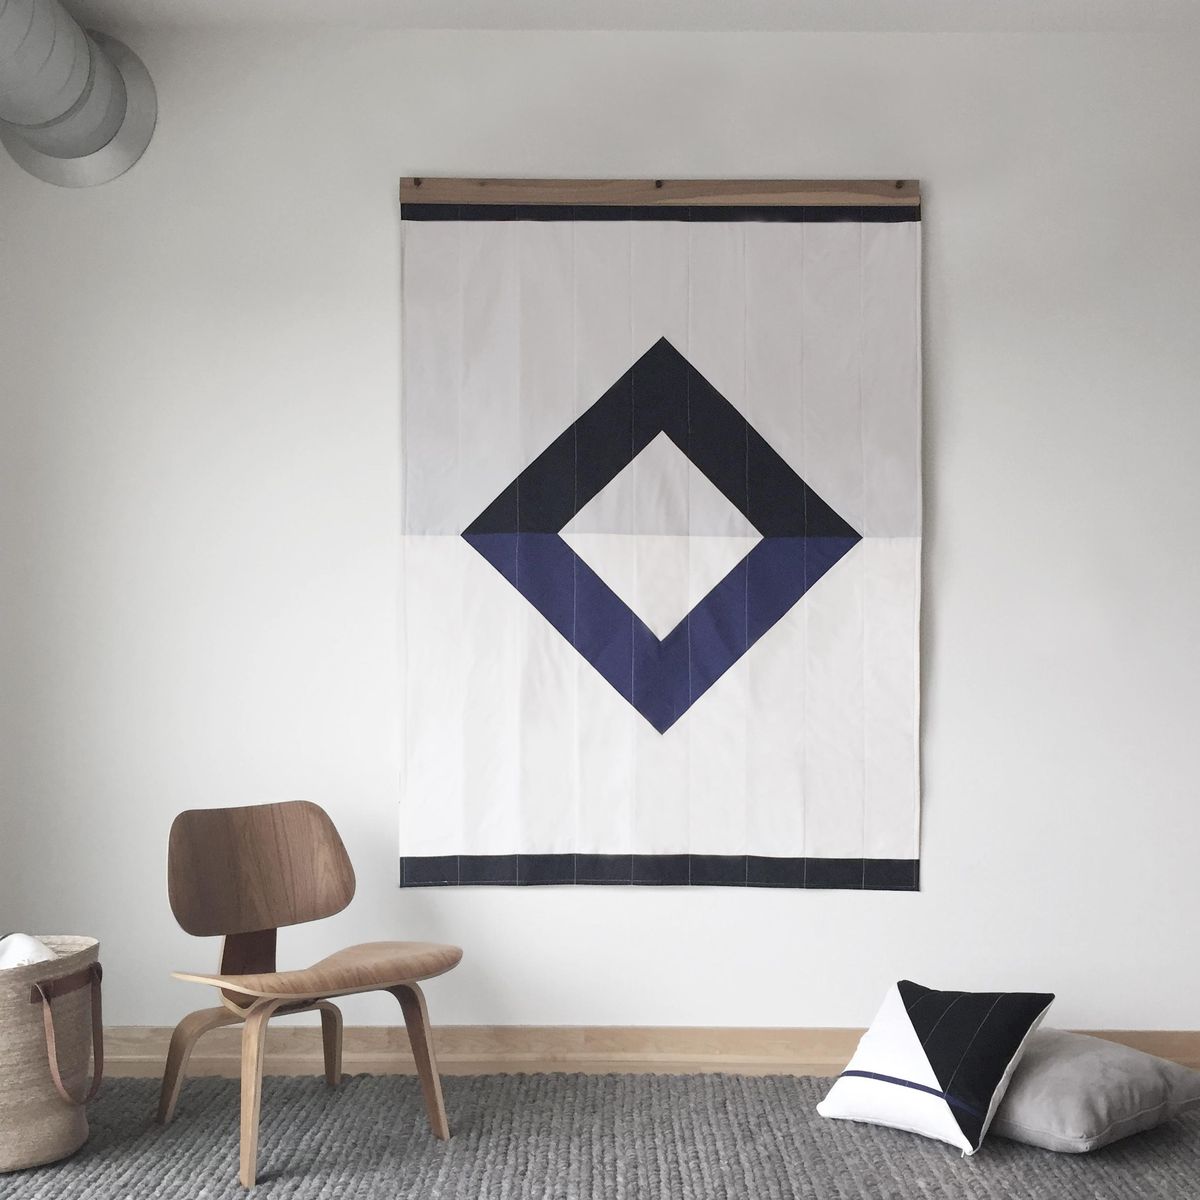 This image released by Louise Gray shows a mounted quilt which was handmade by a team of local quilt makers by Minneapolis-based Louise Gray. In 2016, designers and retailers look to give homespun décor a modern twist. (Associated Press)